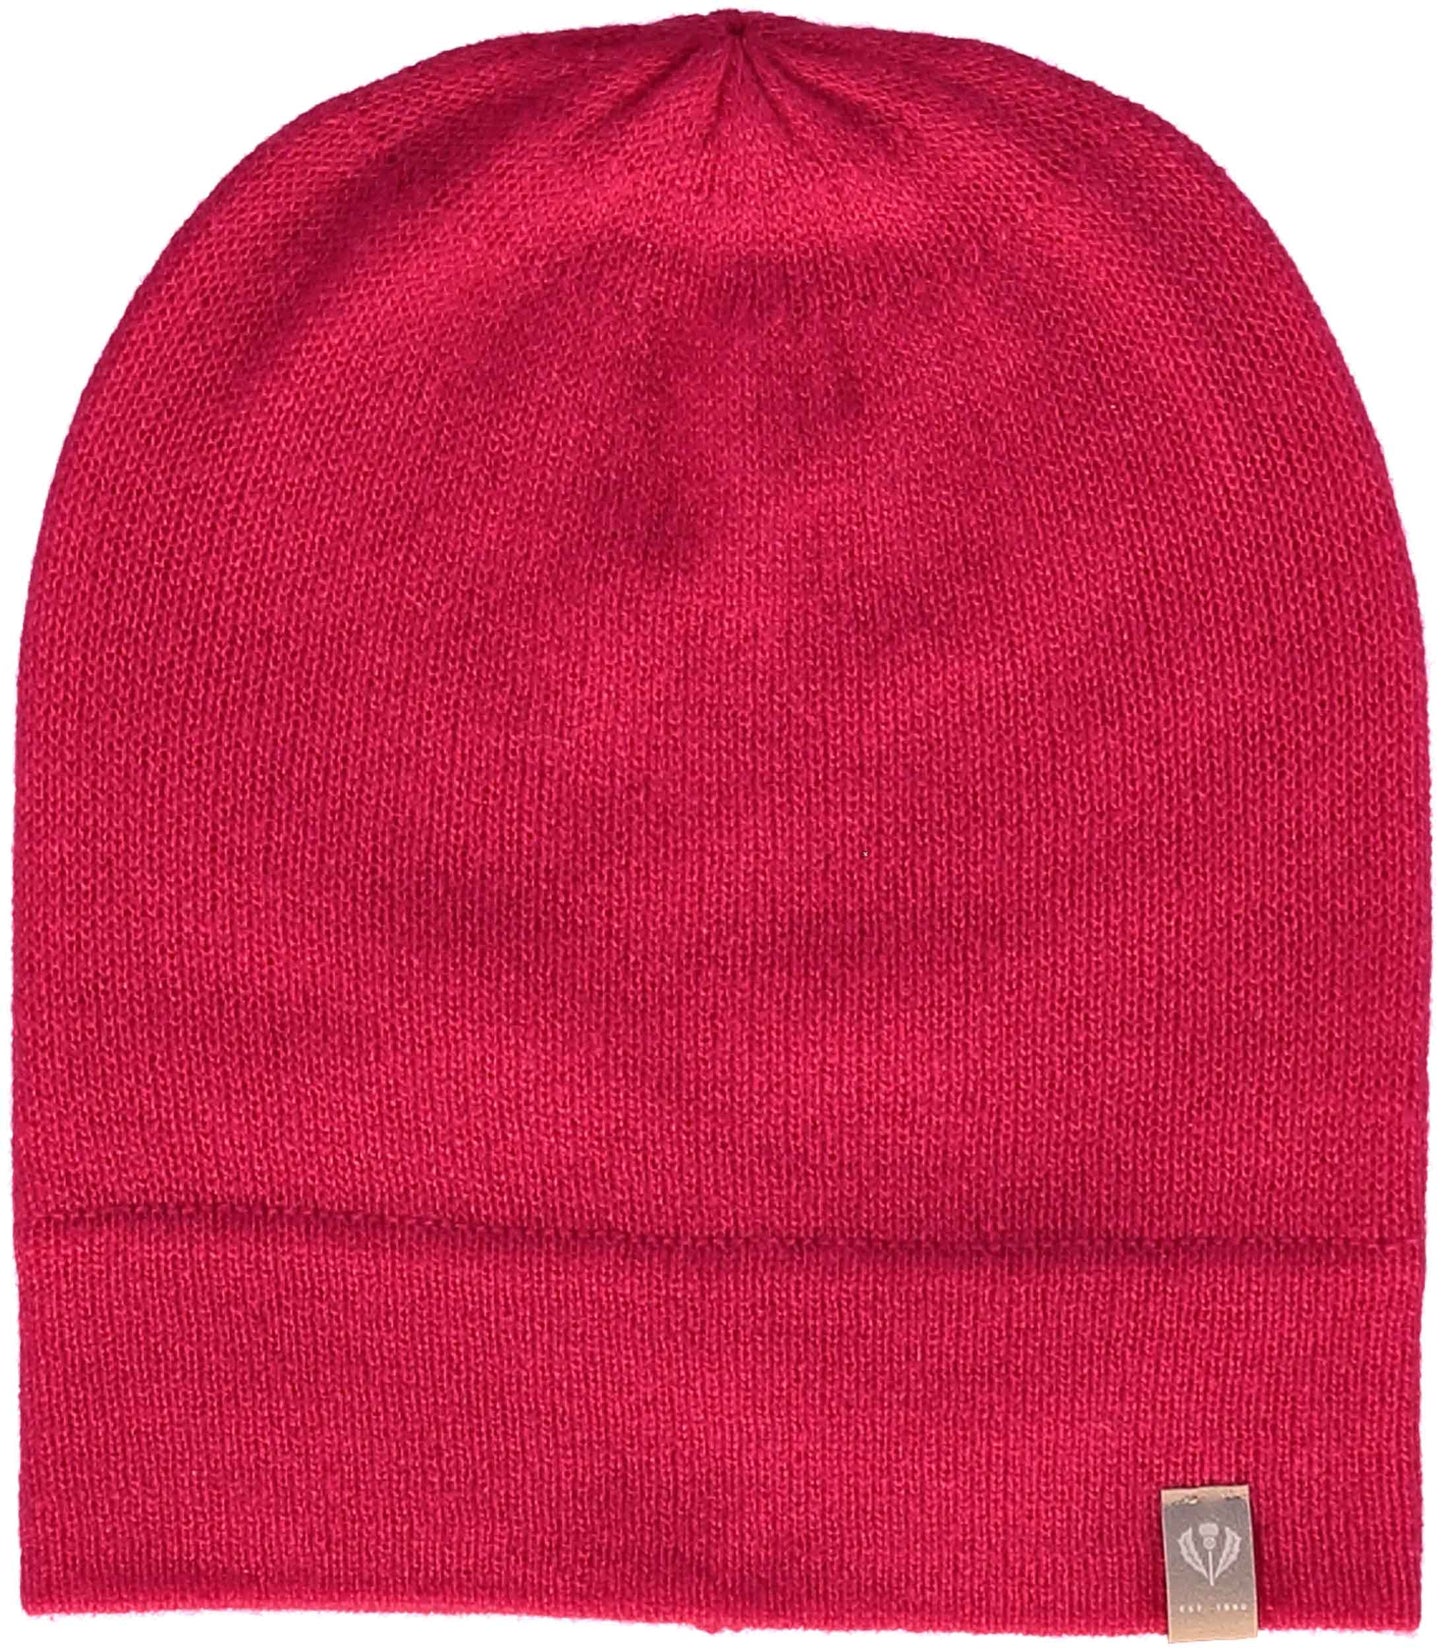 FRAAS Signature Jersey Knit Cashmere Slouch Hat